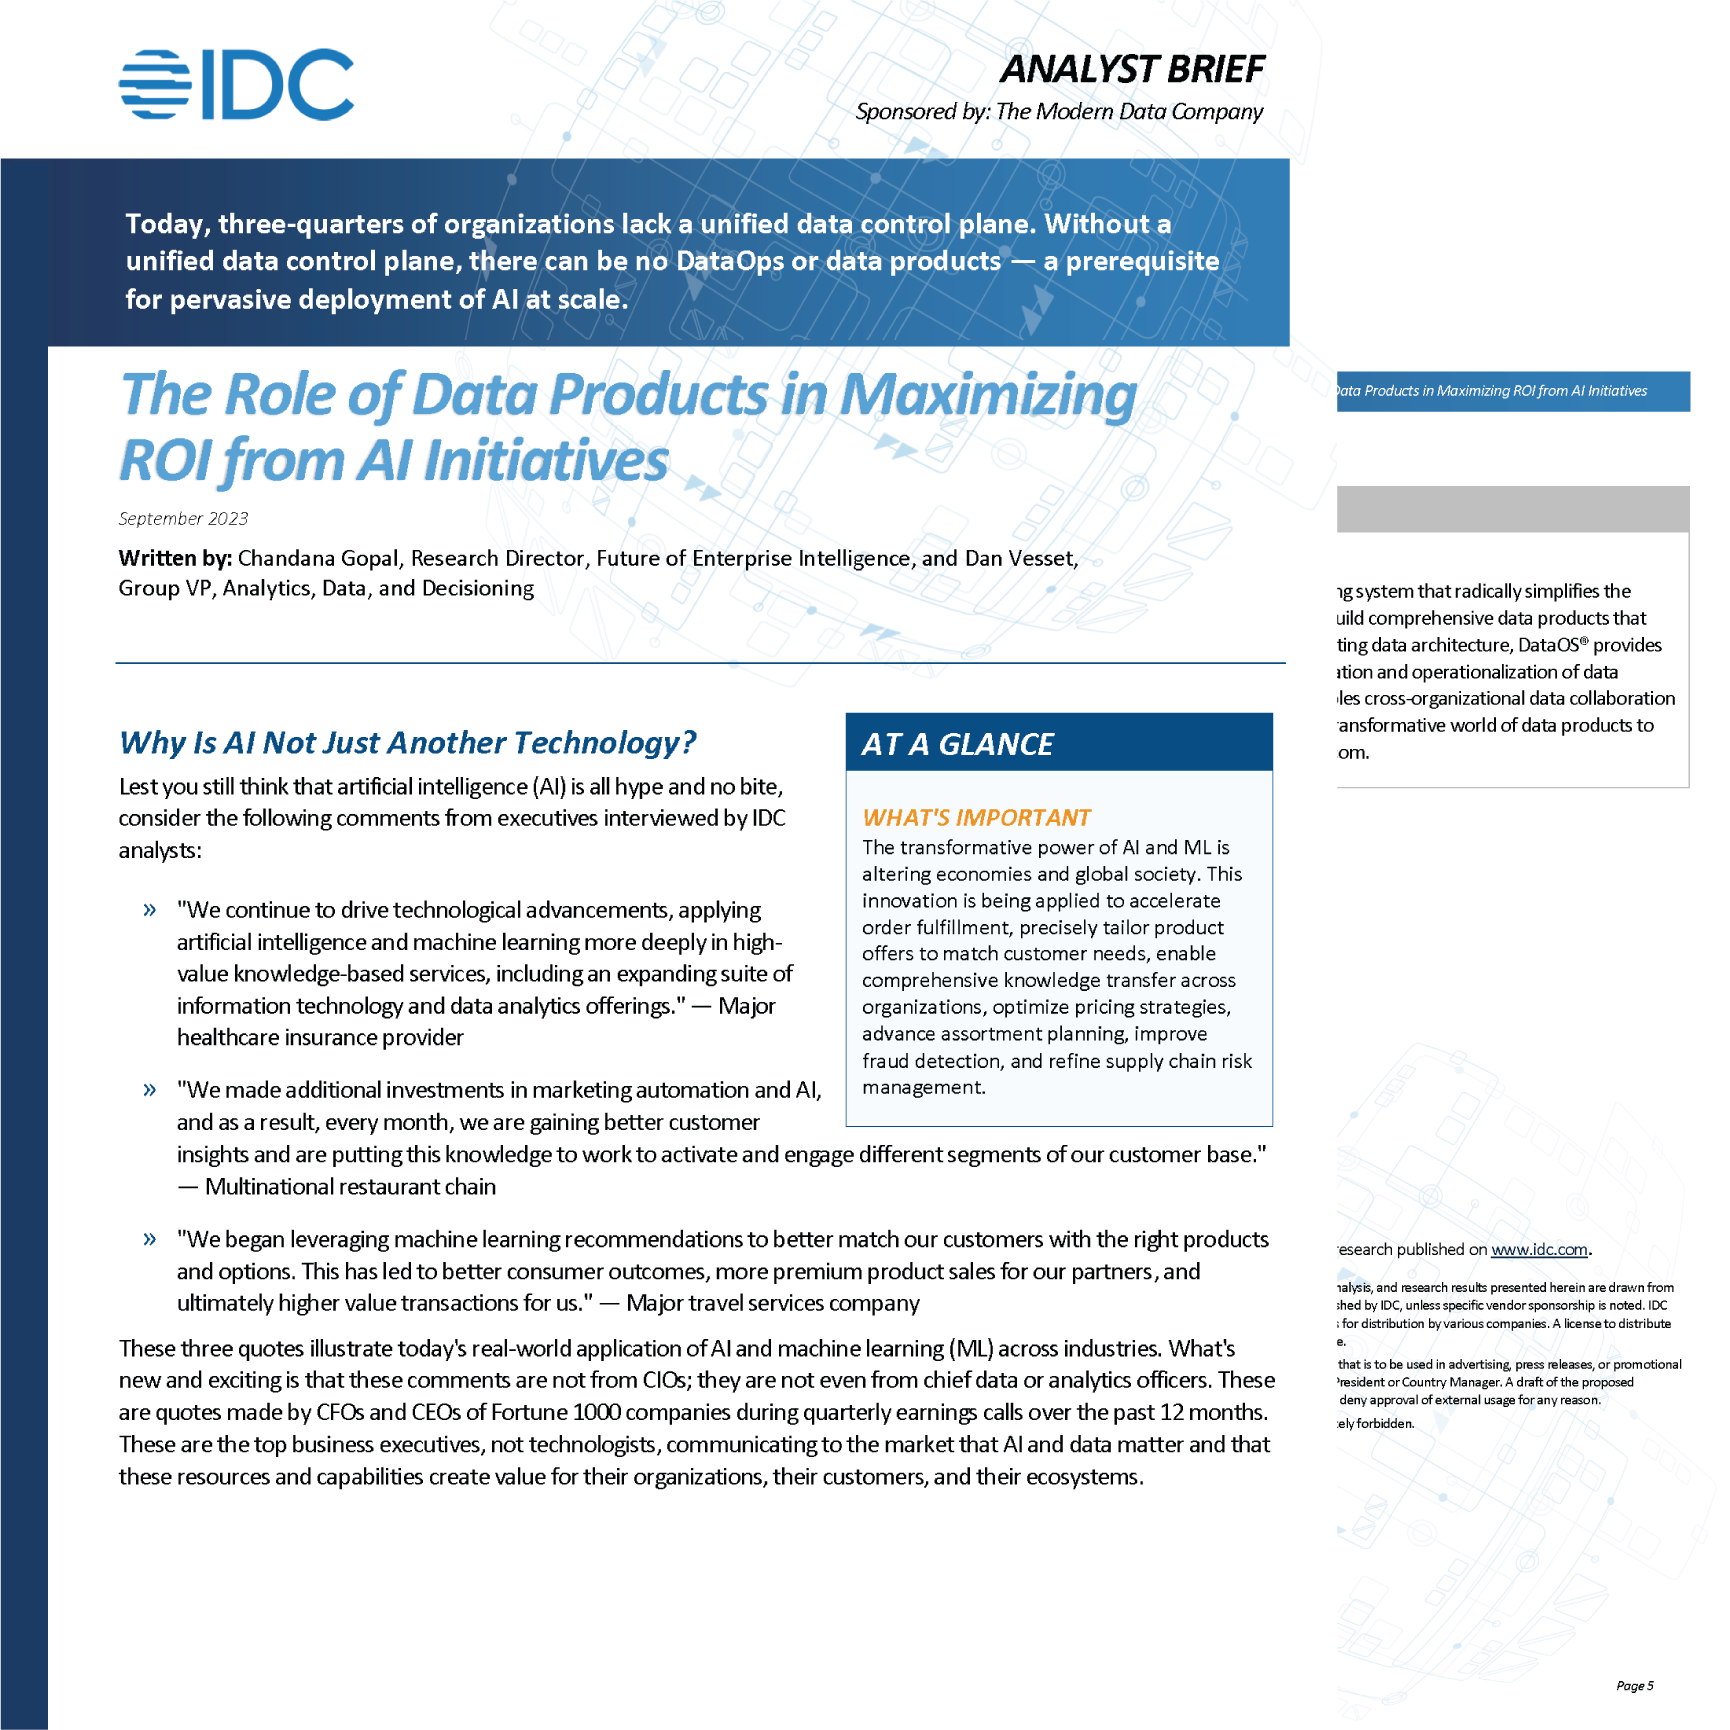 MODERN_IM_IDC_The_Role_of_Data_Products_in_Maximizing_ROI_from_AI_Initiatives_Page